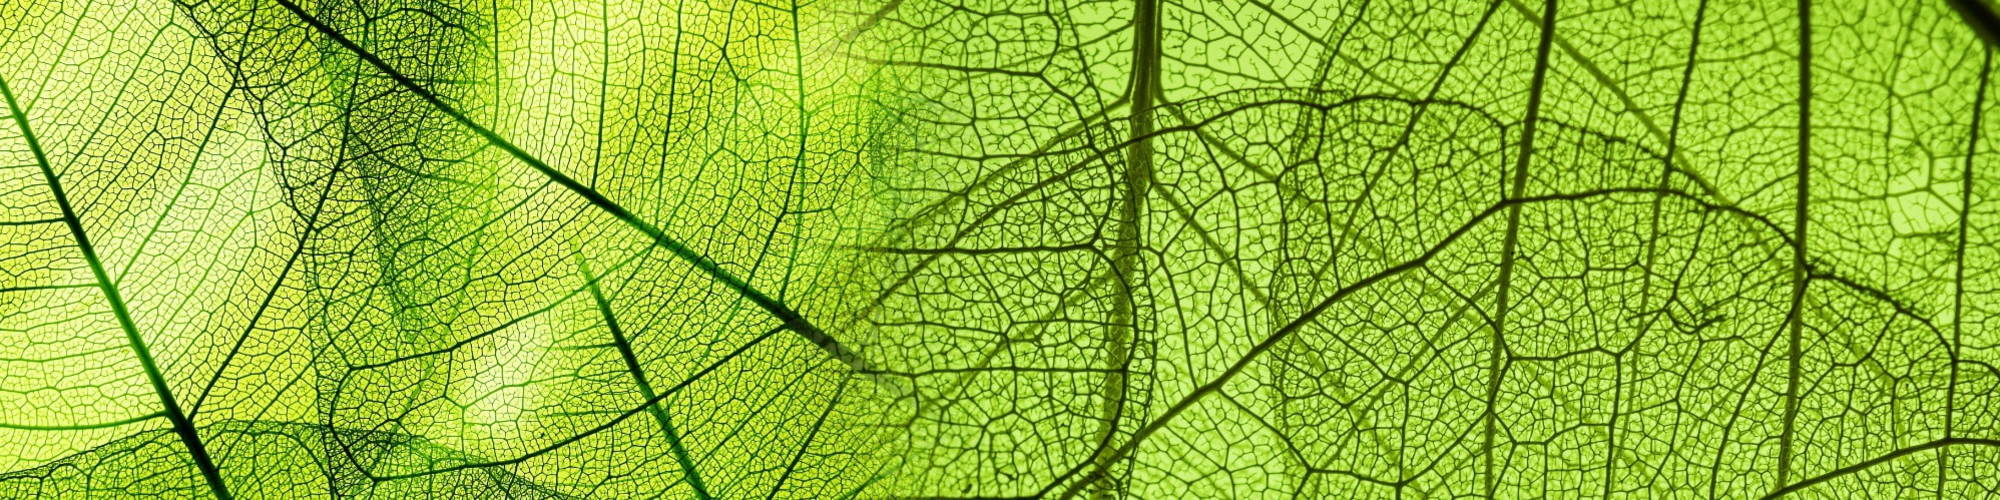 Close up of a light green leaf picture 